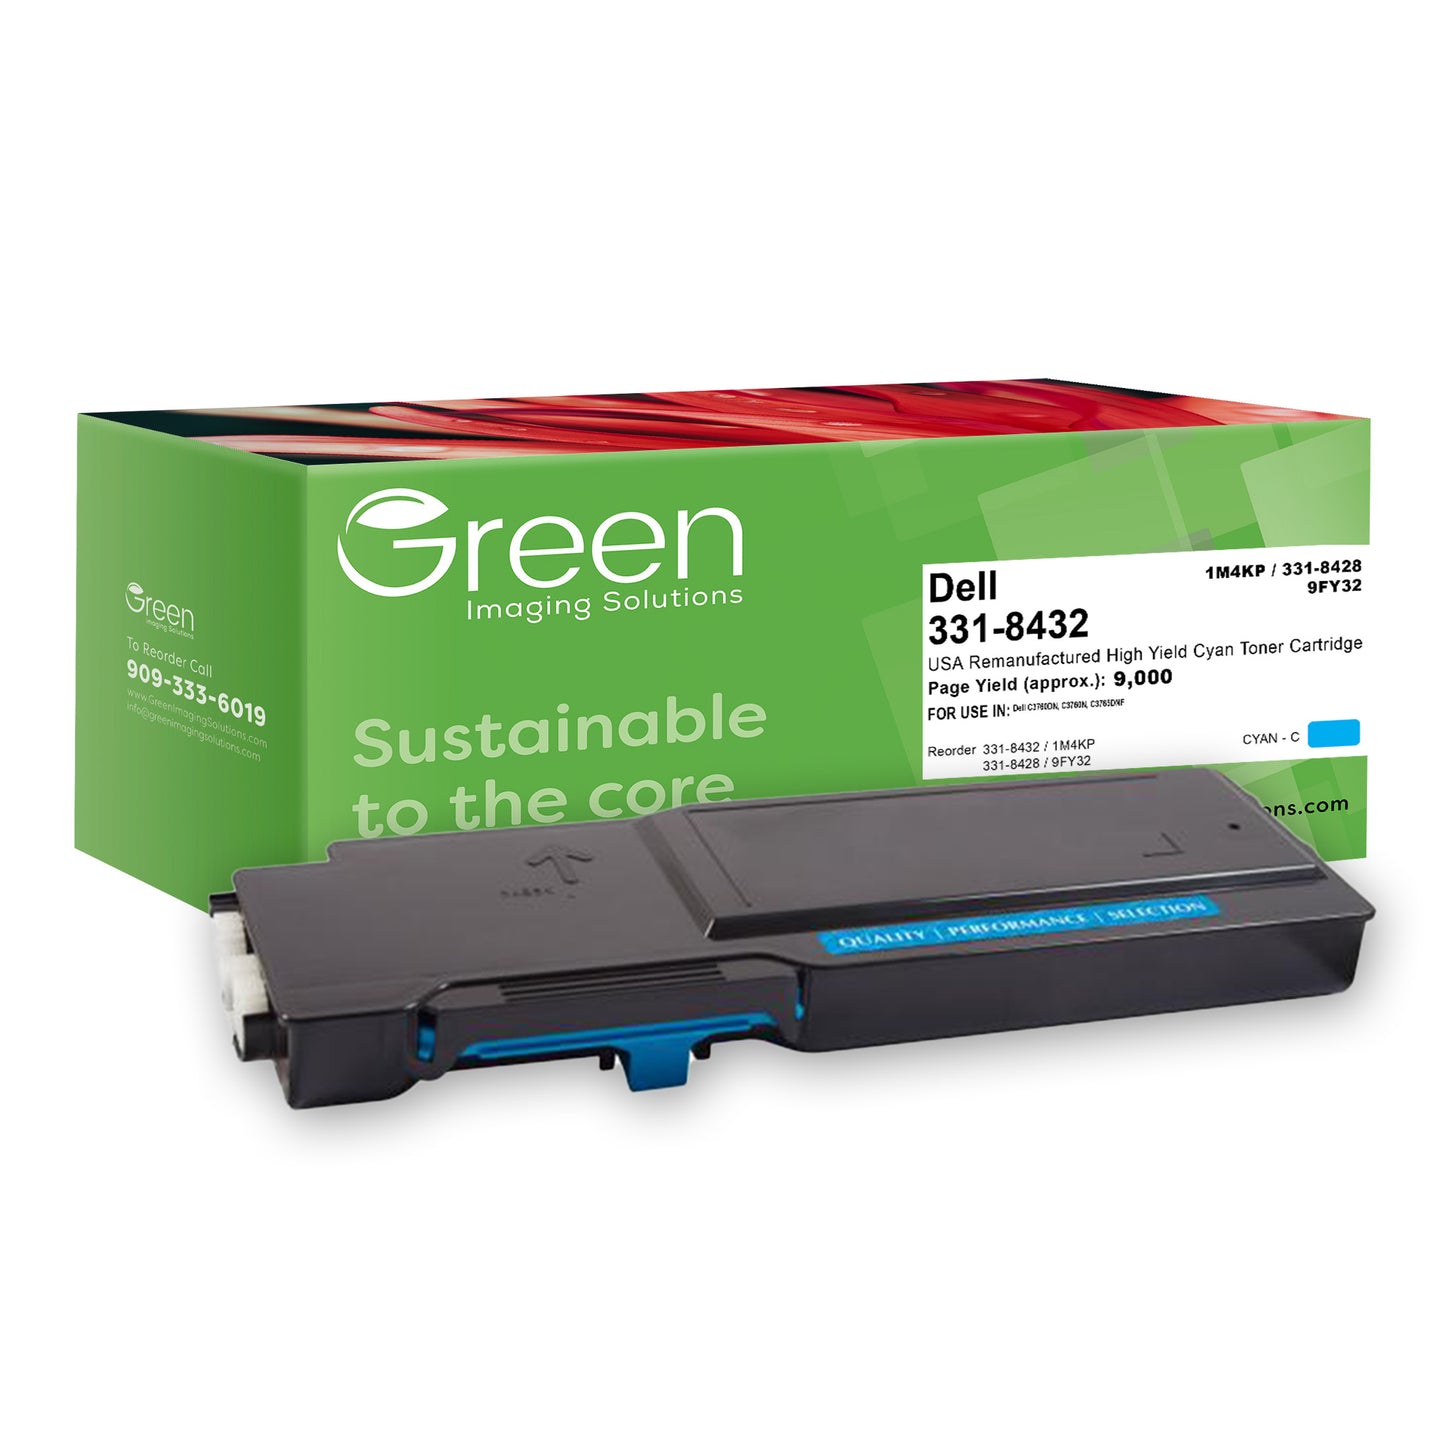 Green Imaging Solutions USA Remanufactured High Yield Cyan Toner Cartridge for Dell C3760